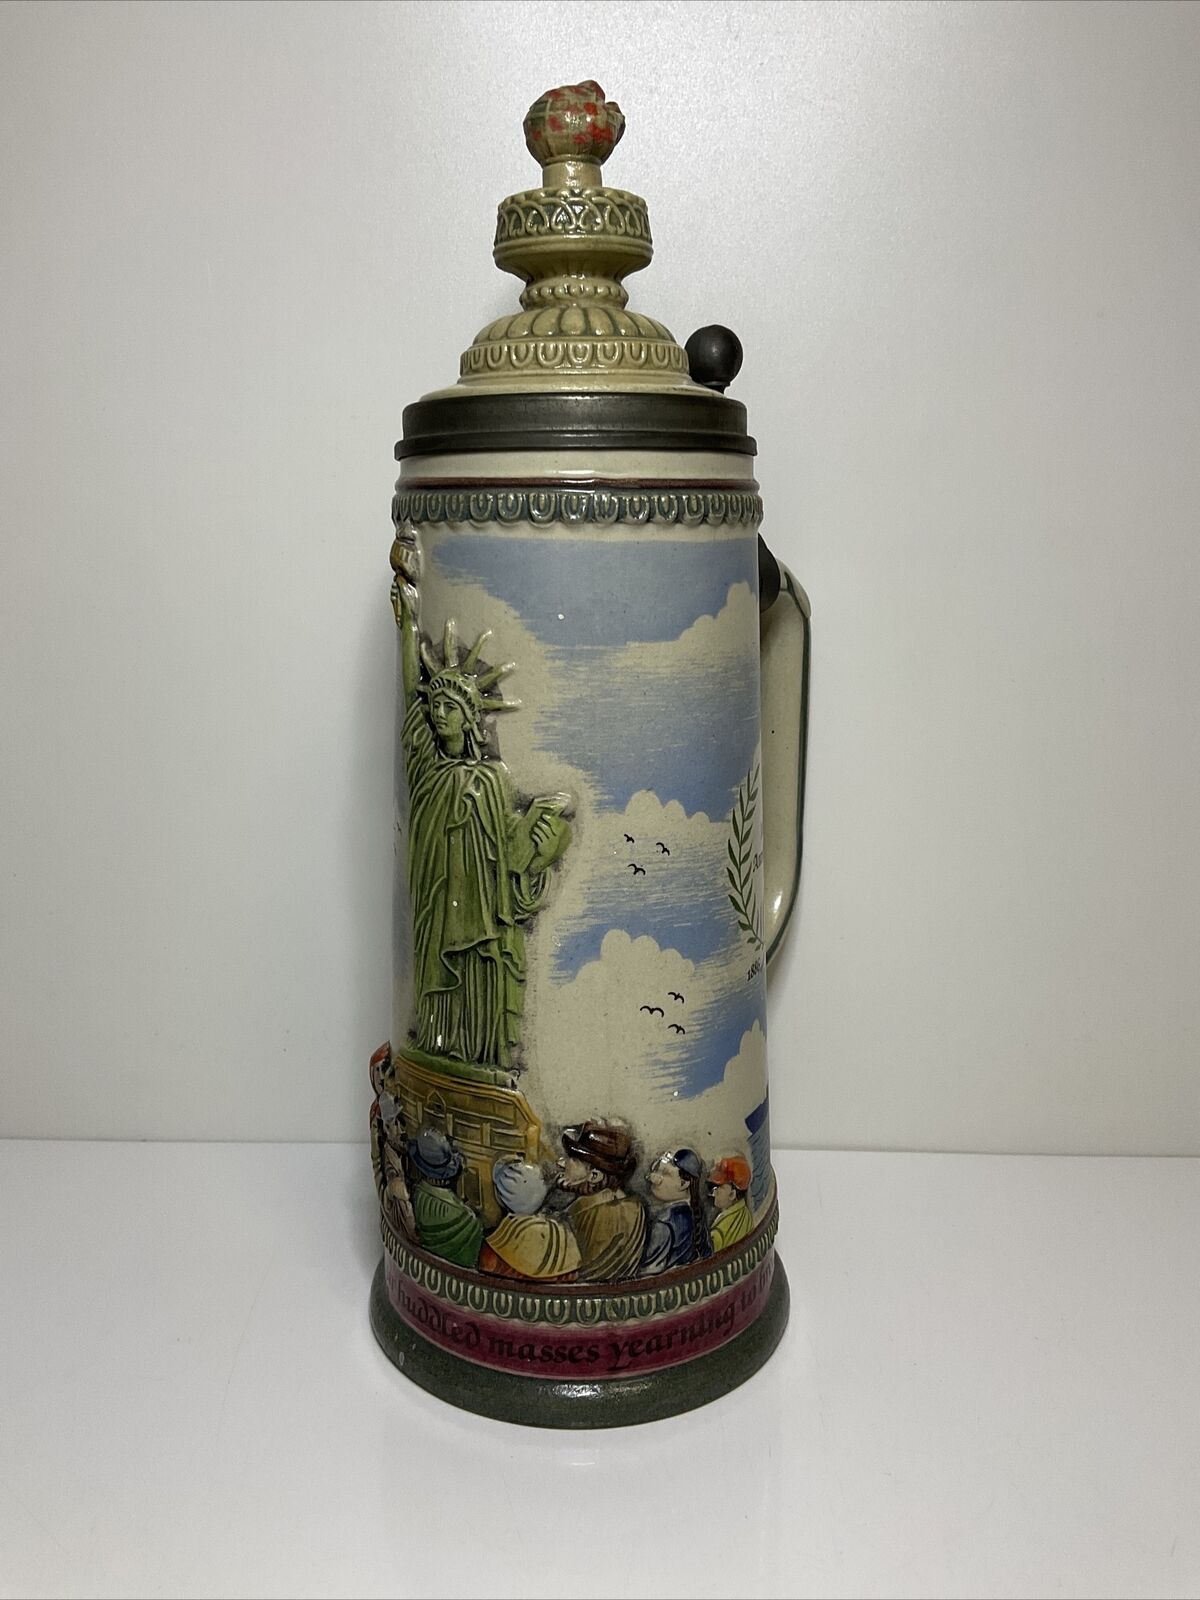 1985 GERZ LIMITED EDITION 100TH ANNIVERSARY STATUE OF LIBERTY BEER STEIN .